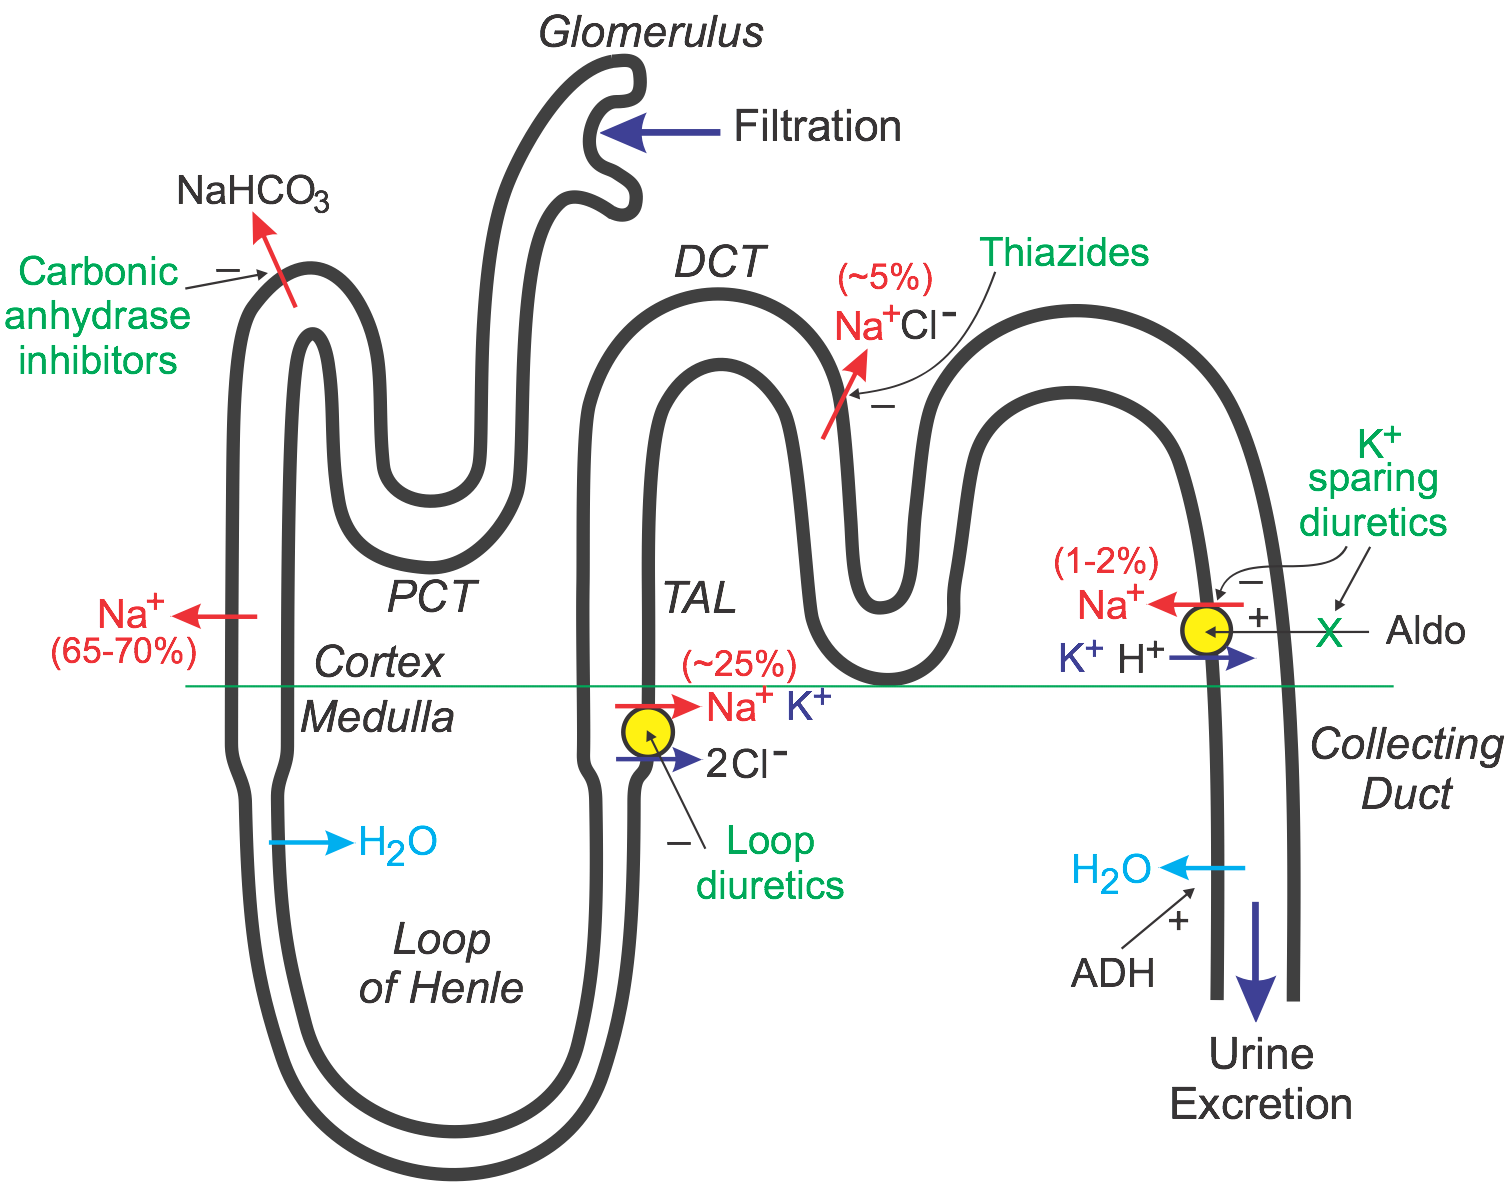 nephron sites for diuretic actions